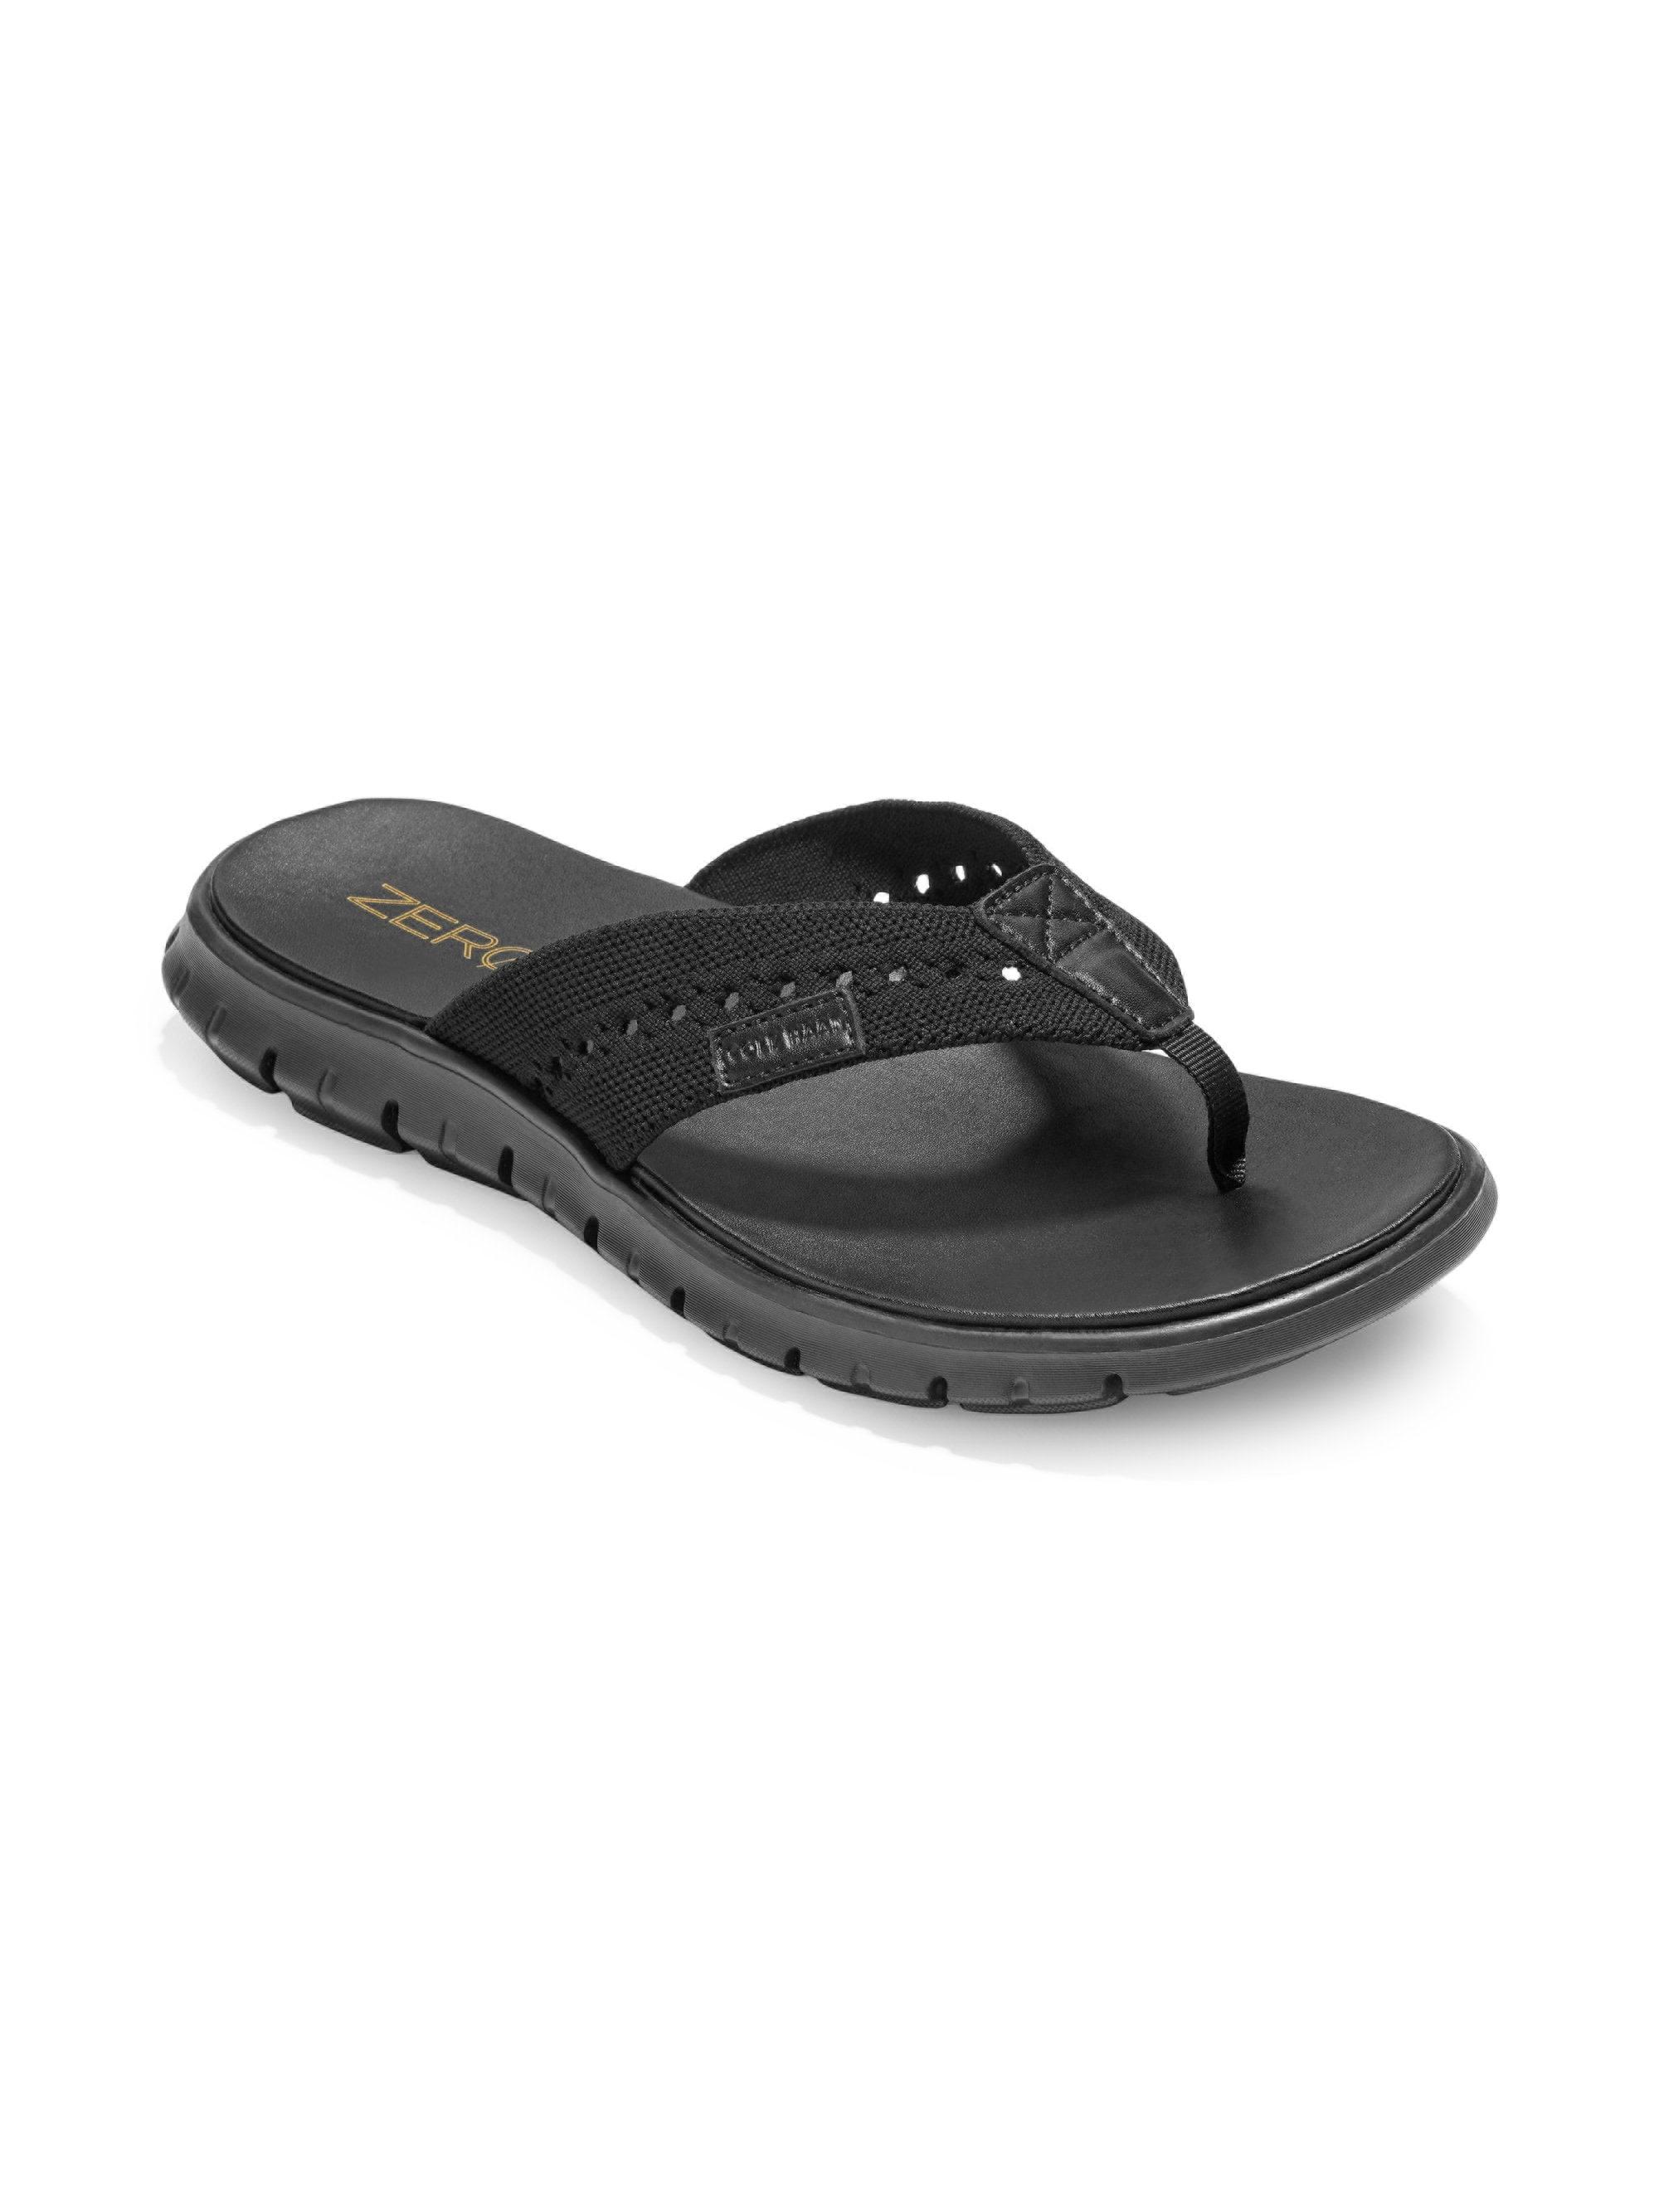 Cole Haan Zerogrand Knit Thong Sandals in Black for Men - Lyst